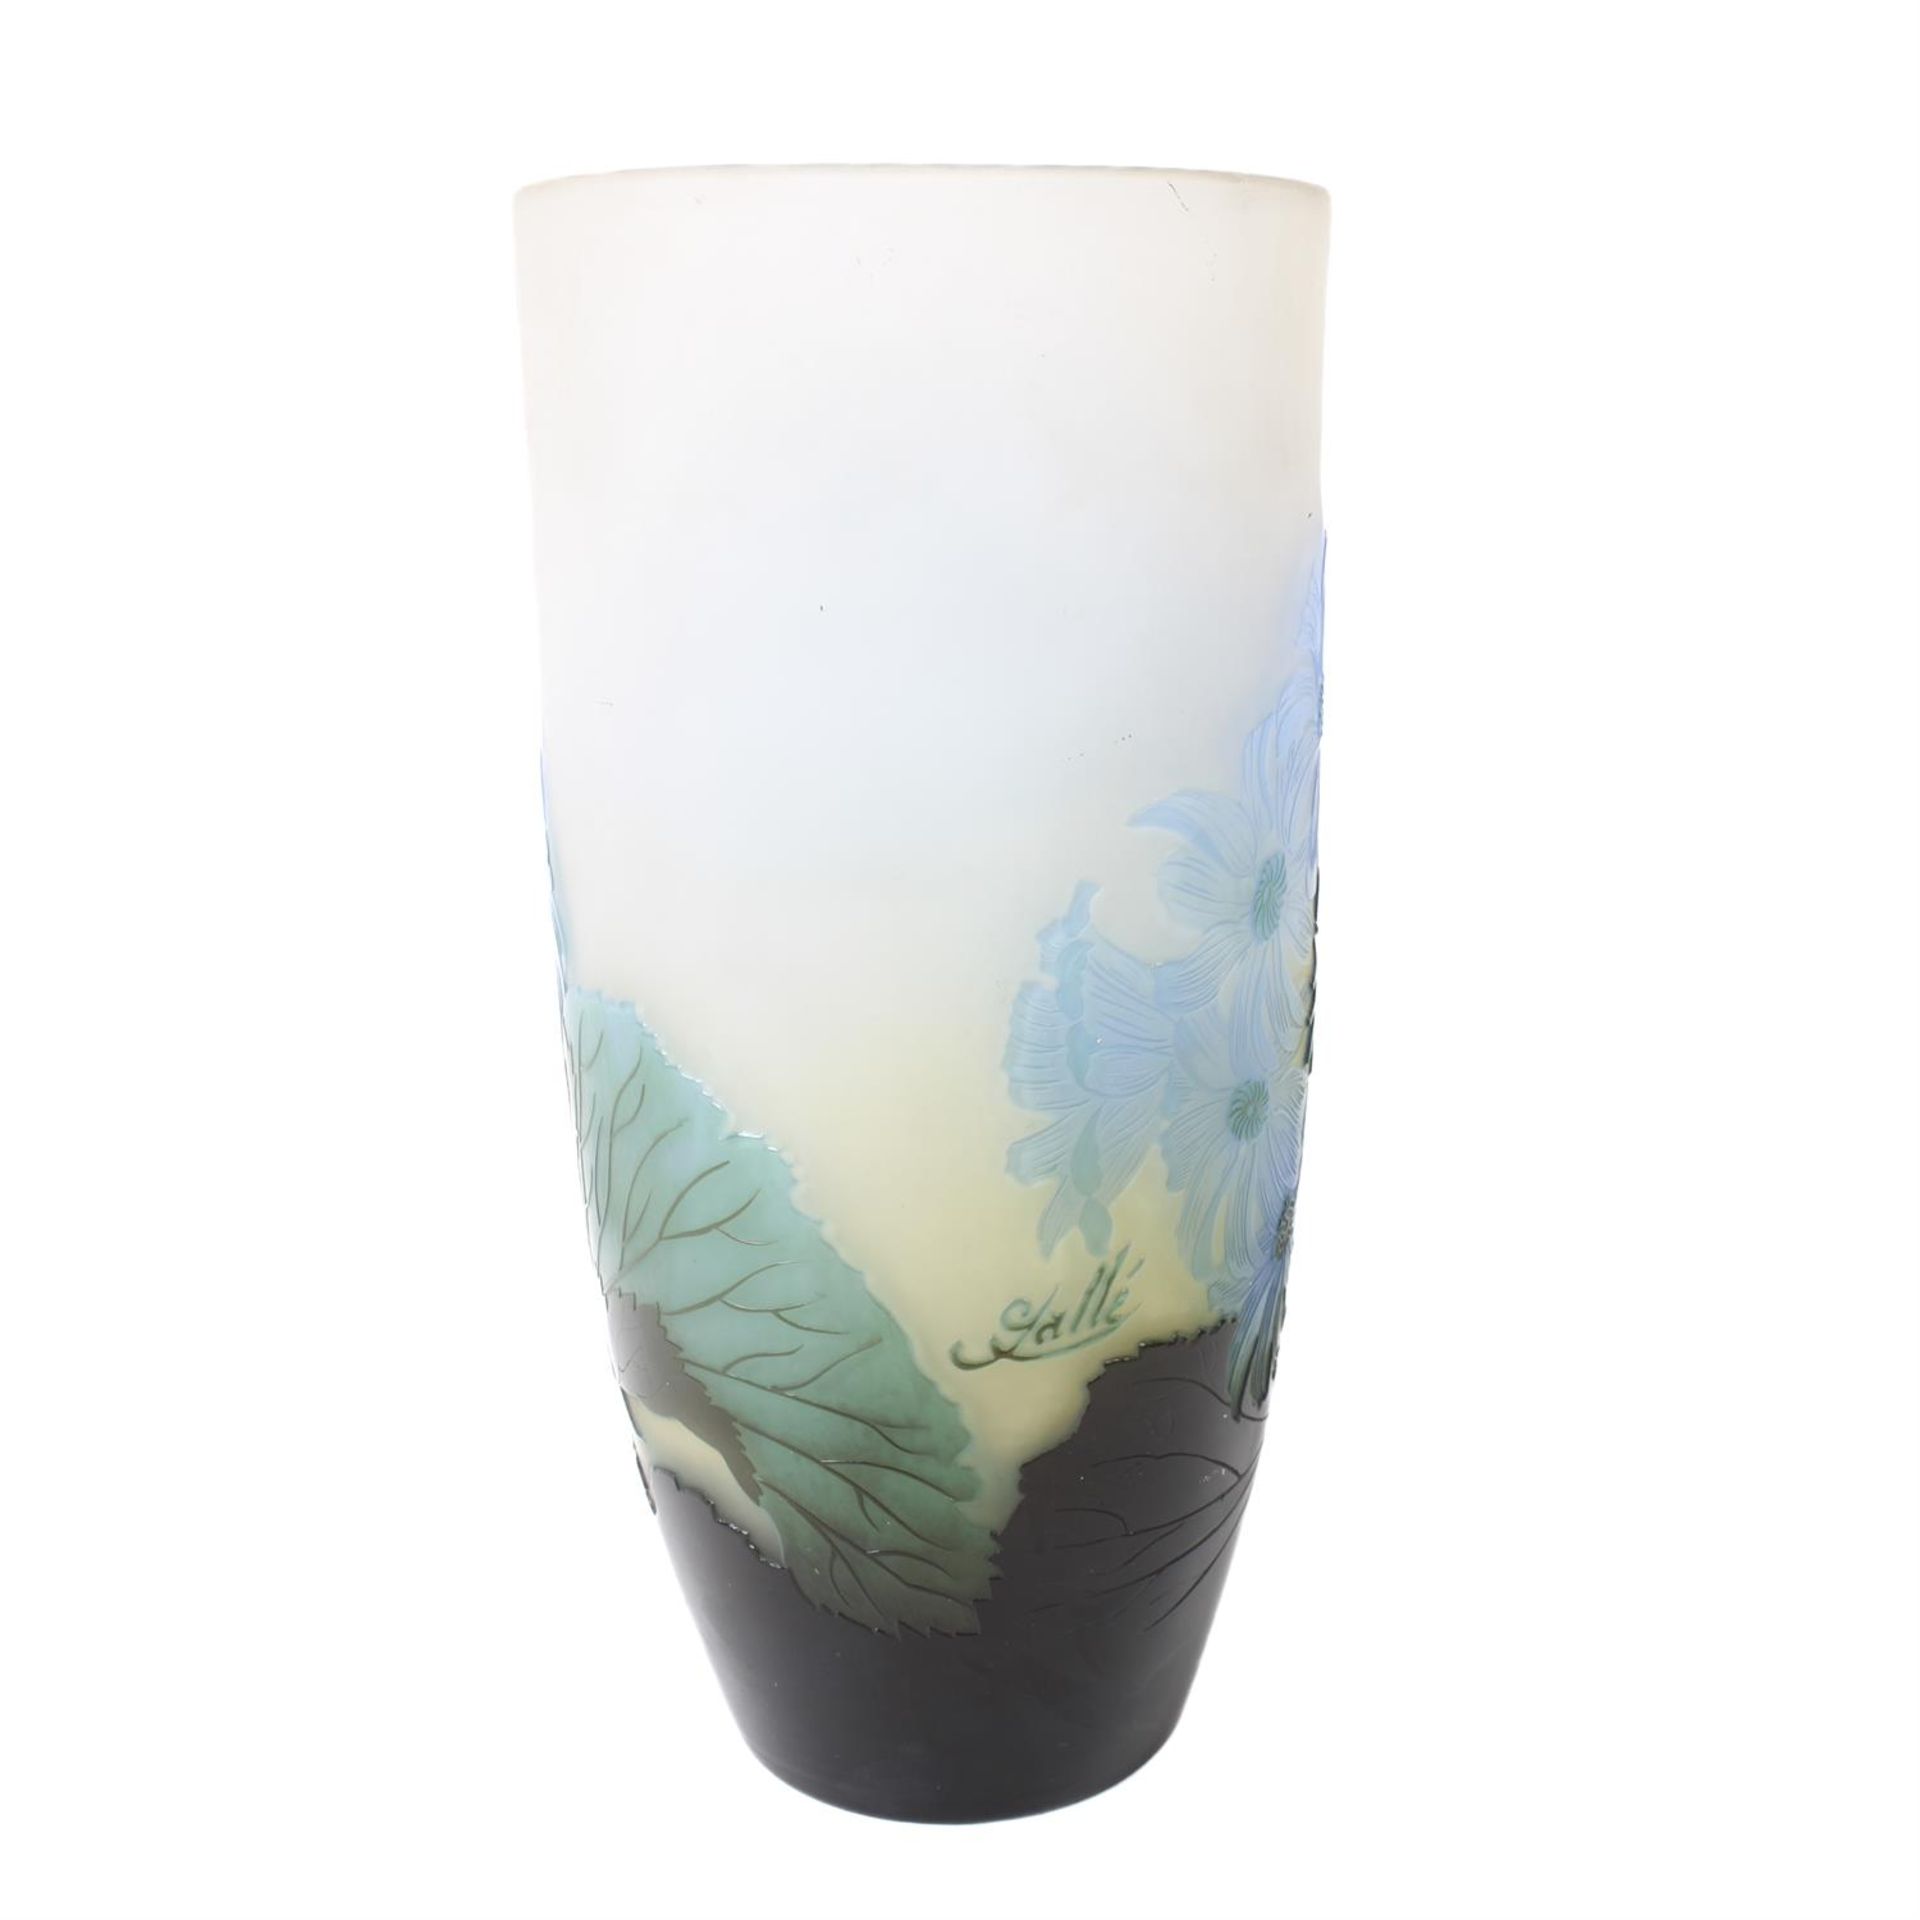 Emile Galle cameo glass vase with daisies - Image 2 of 8